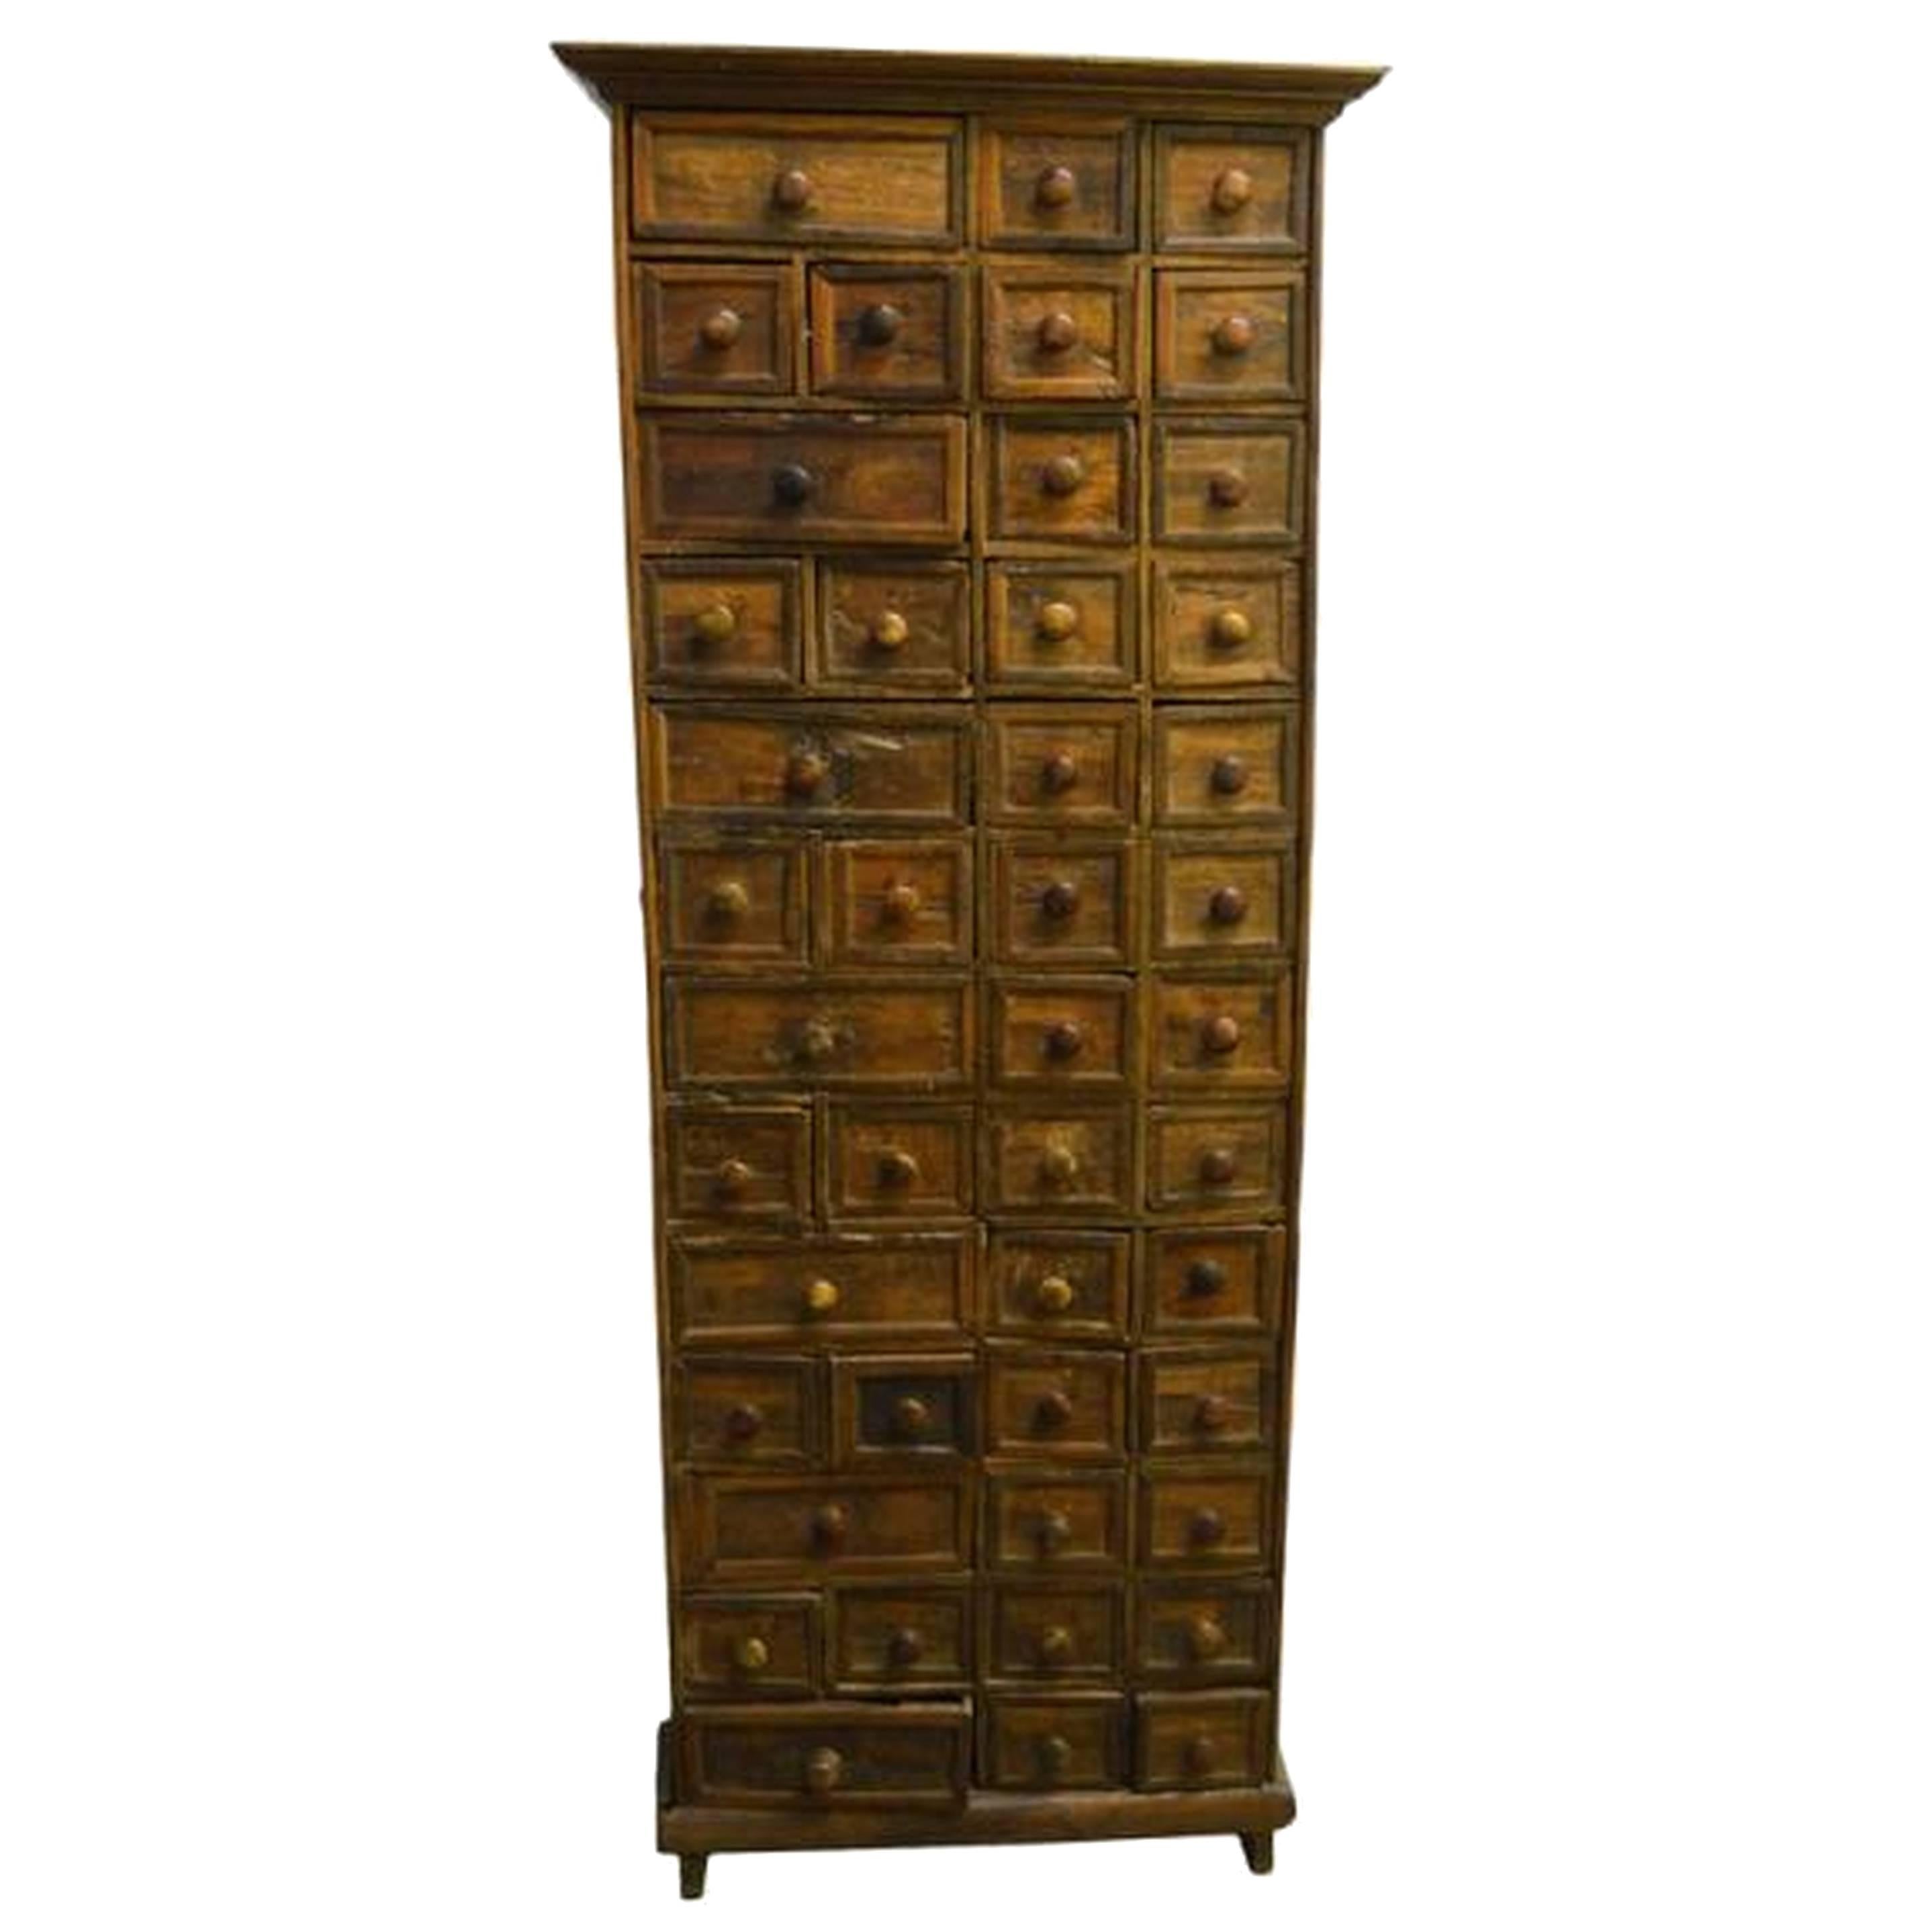 Antique Indonesian Apothecary Cabinet with 45 drawers from the 19th Century